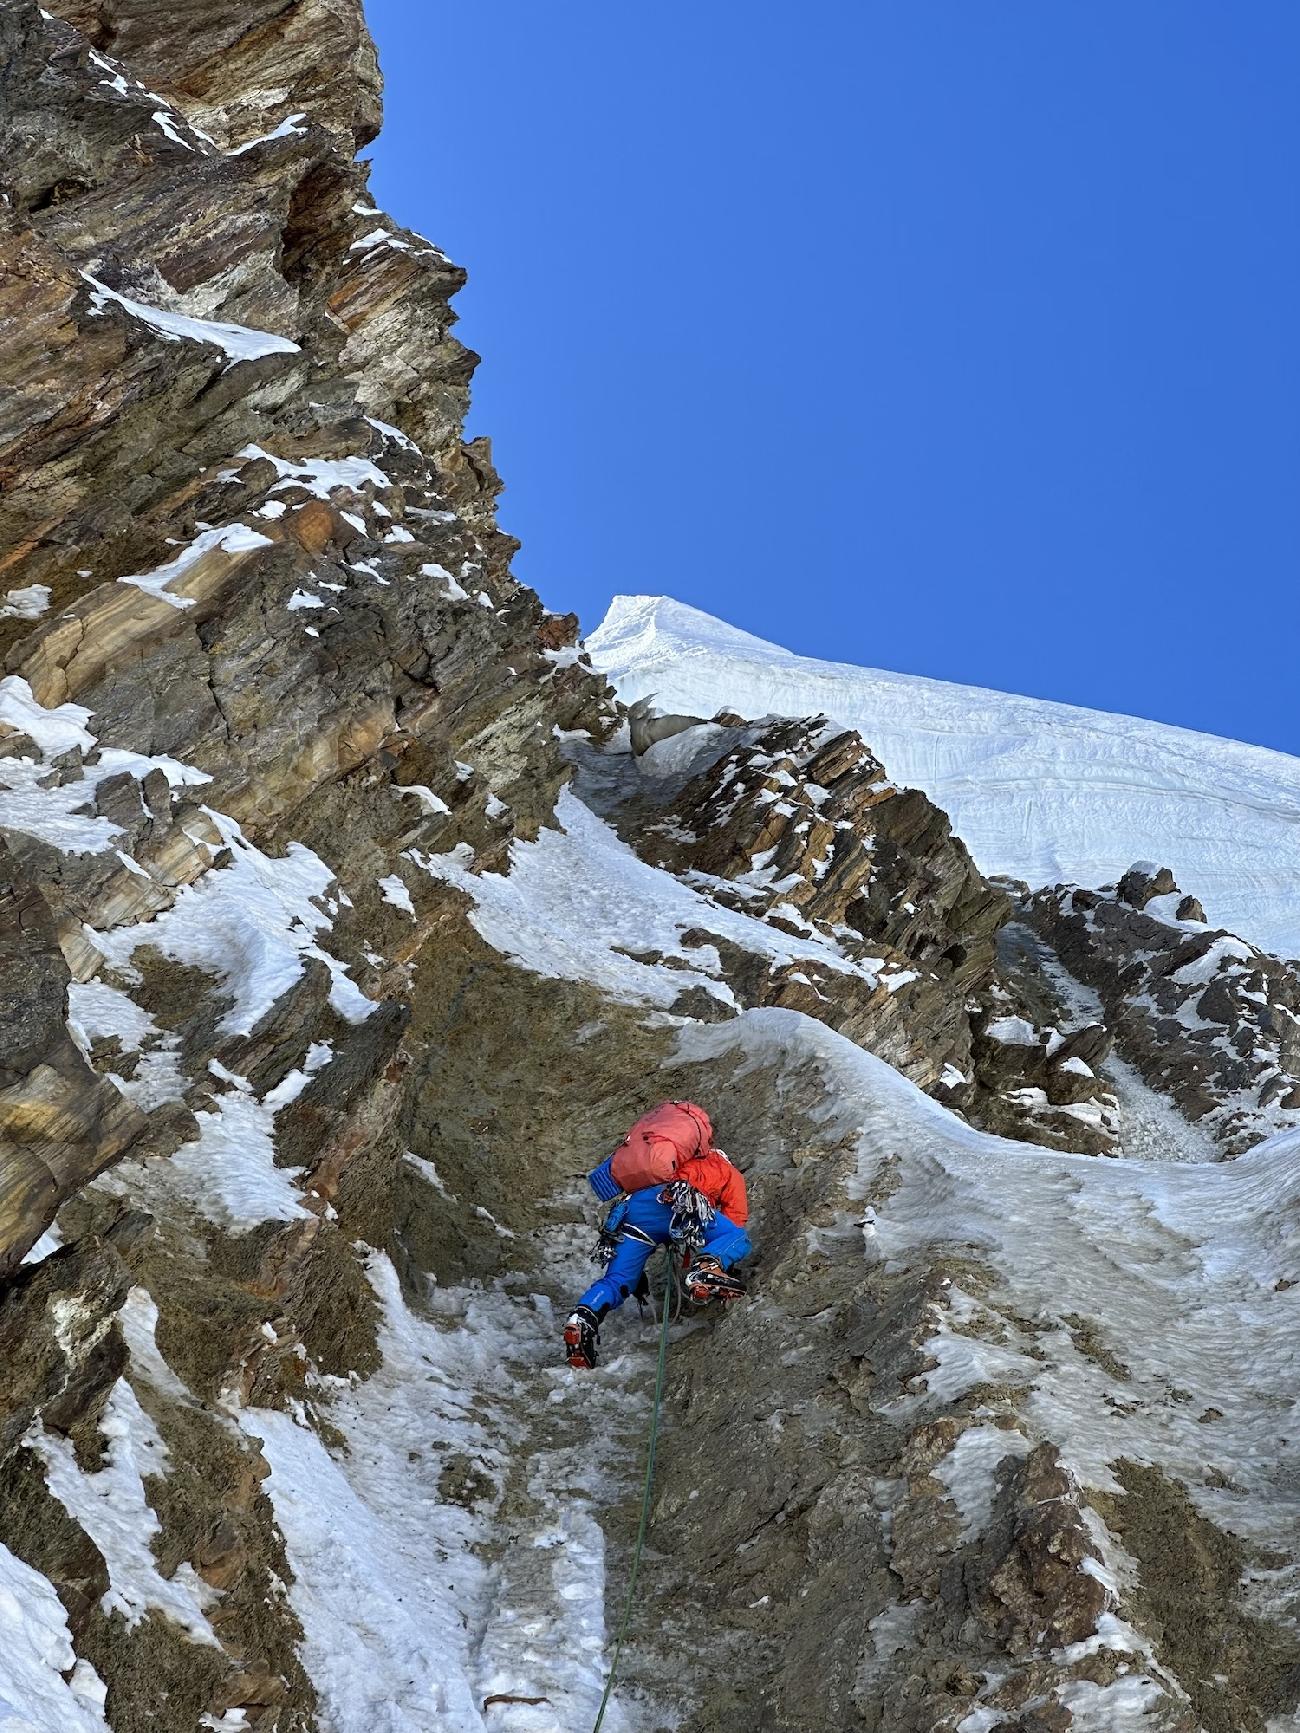 Flat Top India, Hugo Béguin, Matthias Gribi, Nathan Monard - Make the first ascent of 'Tomorrow is another day' on the north face of Flat Top, Kishtwar India (Hugo Béguin, Matthias Gribi, Nathan Monard 03-07/10/ 2023 )